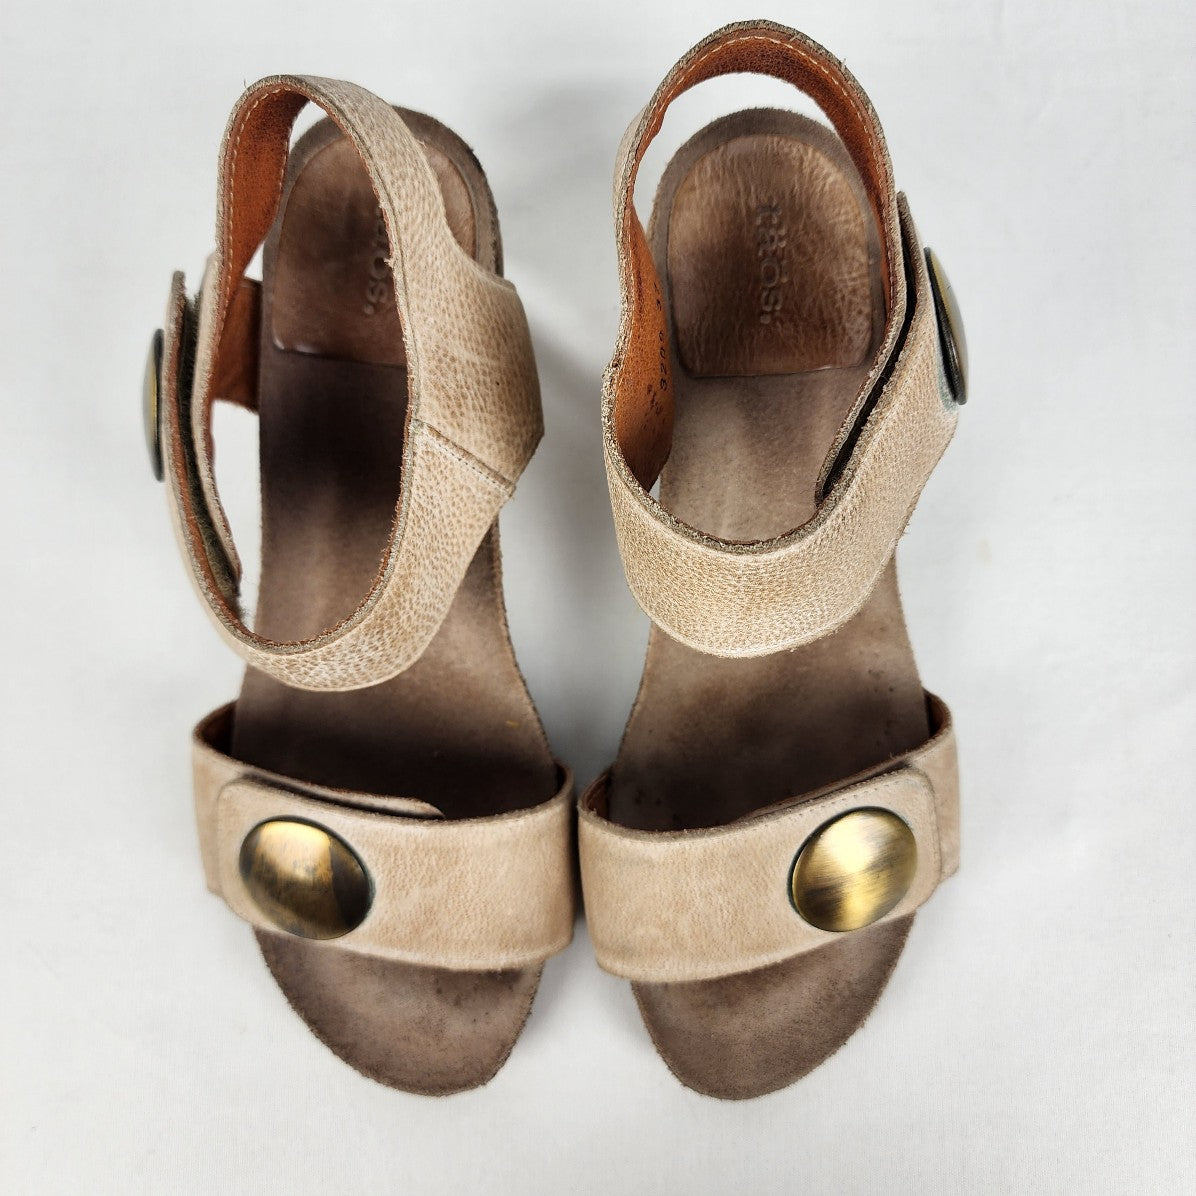 Taos Nude & Gold Leather Ankle Strap Wedge Sandals Size 6.5